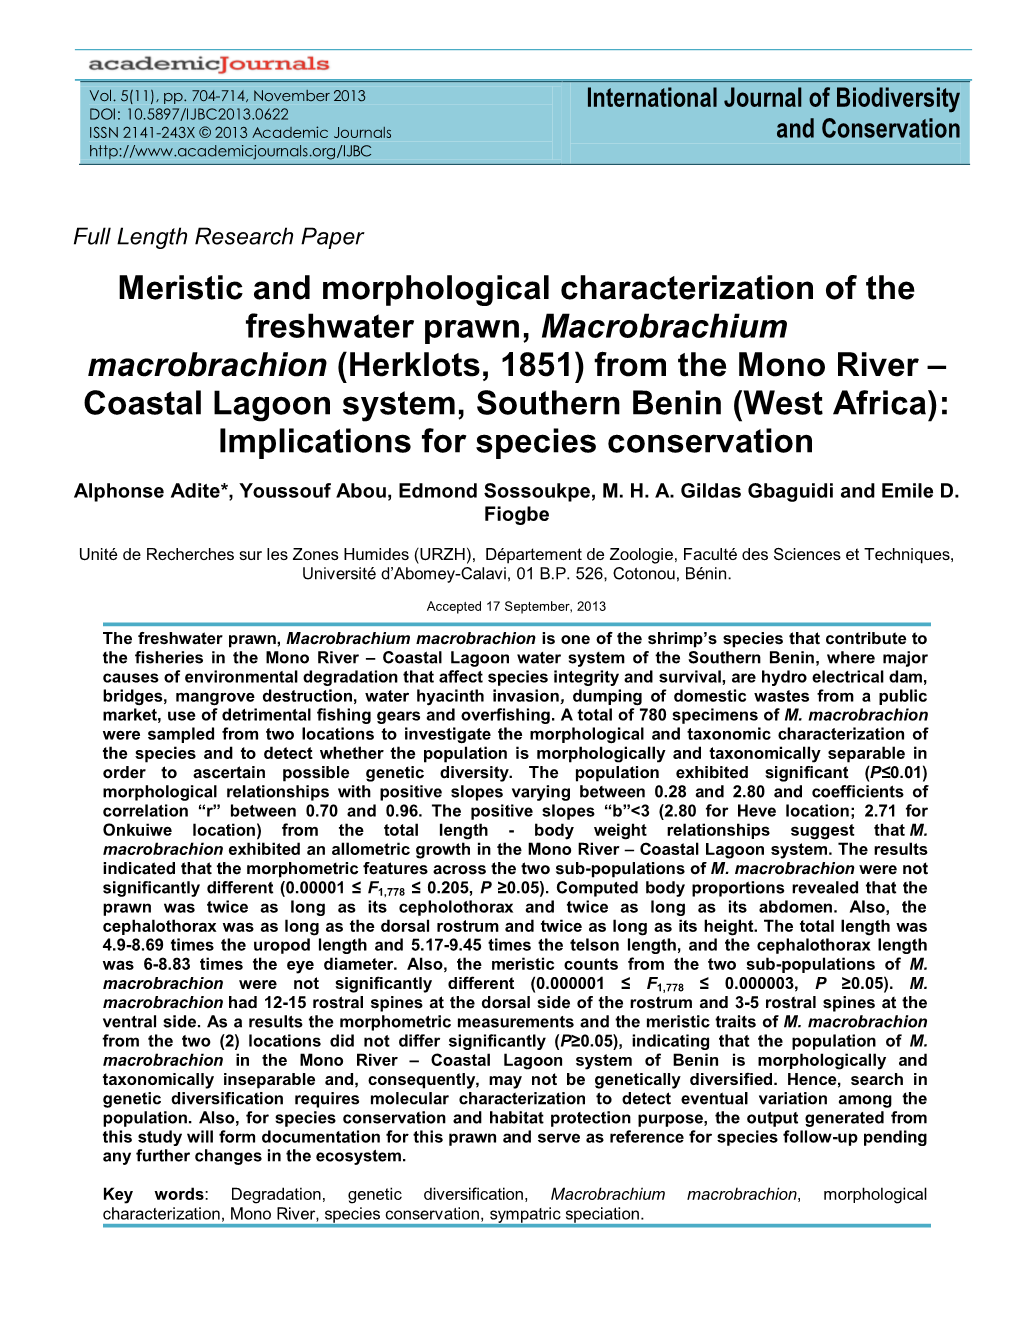 Meristic and Morphological Characterization of the Freshwater